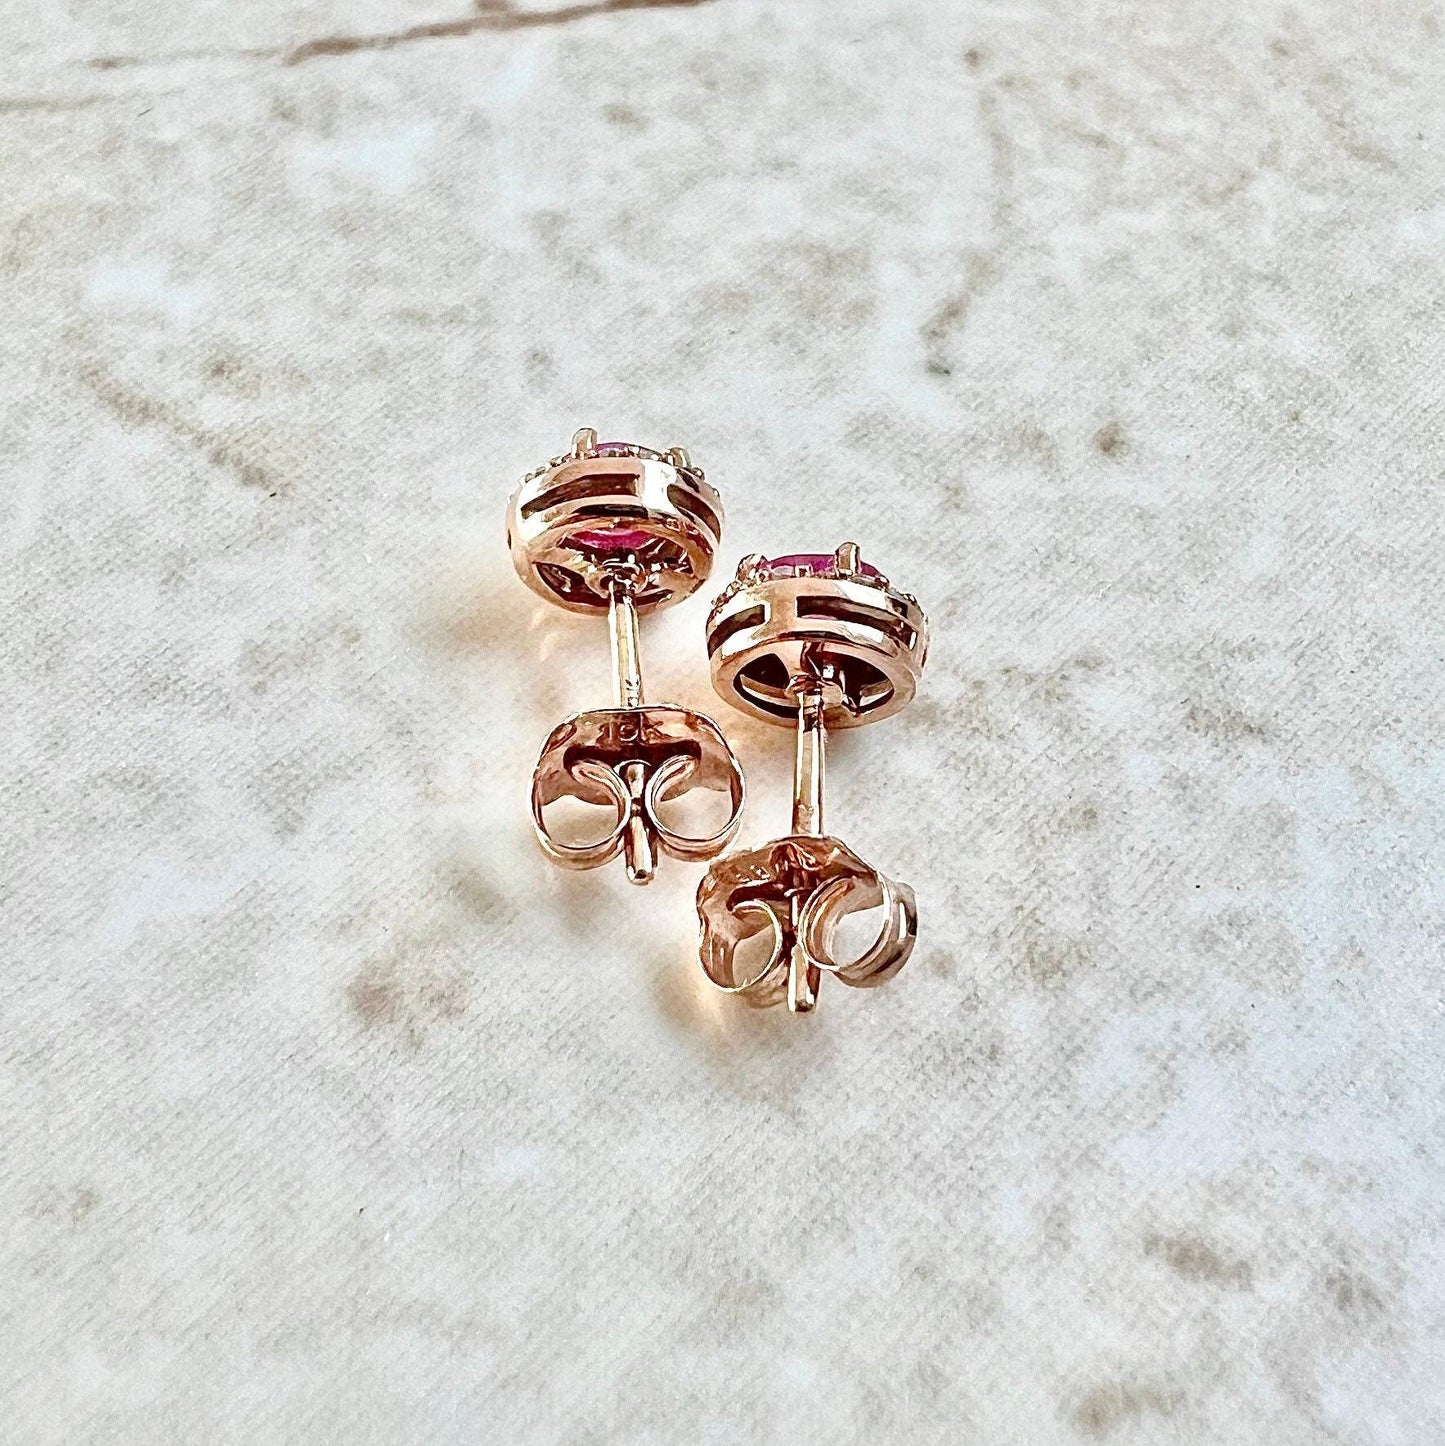 10K Round Ruby Halo Stud Earrings - Rose Gold Ruby Studs - Gold Ruby Earrings - Genuine Ruby Halo Earrings - Best July Birthstone Gift